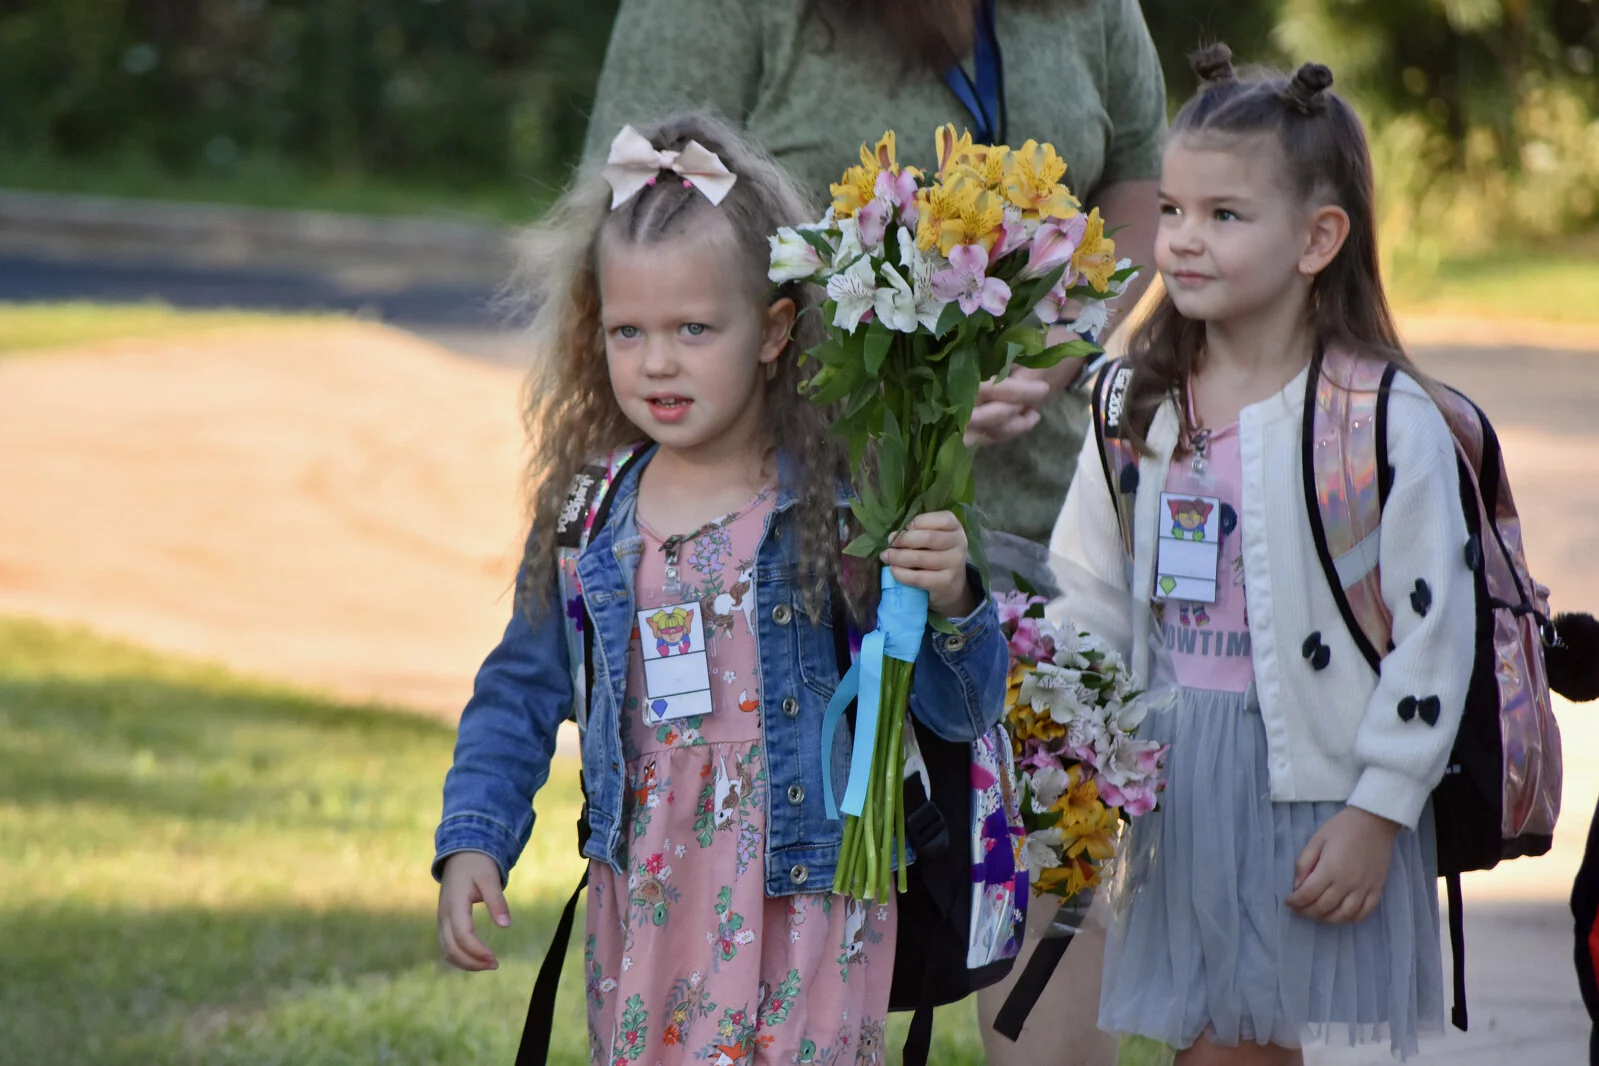 Two students arrive at school with bouquets of flowers for the teachers